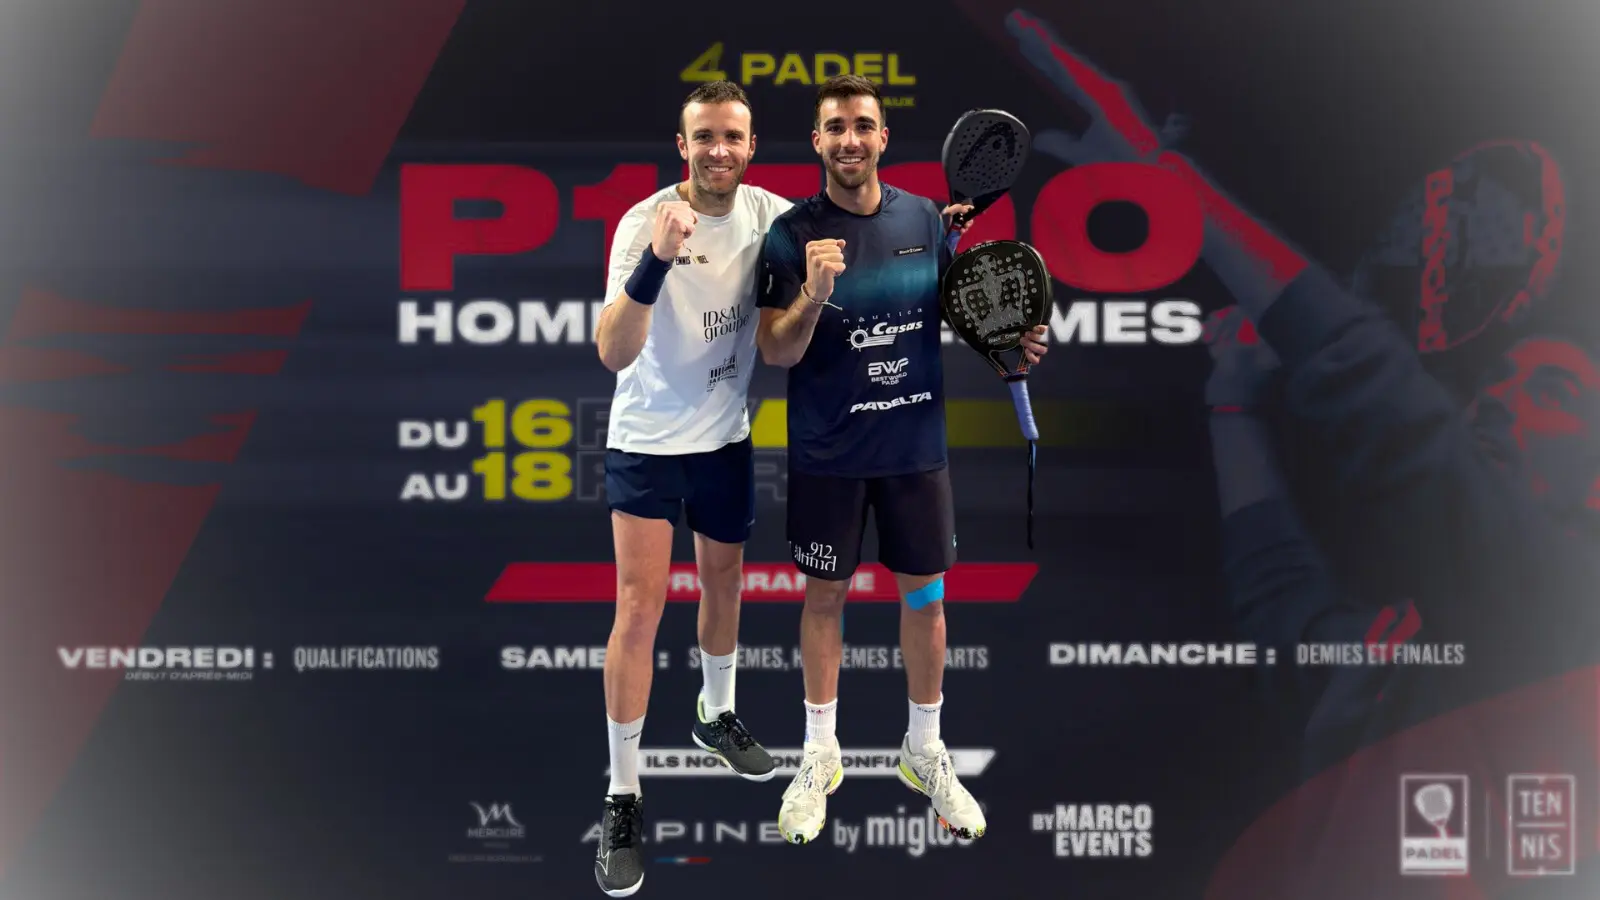 Grué / Garcia gets the P1500 of 4Padel Bordeaux at the end of a great finish!